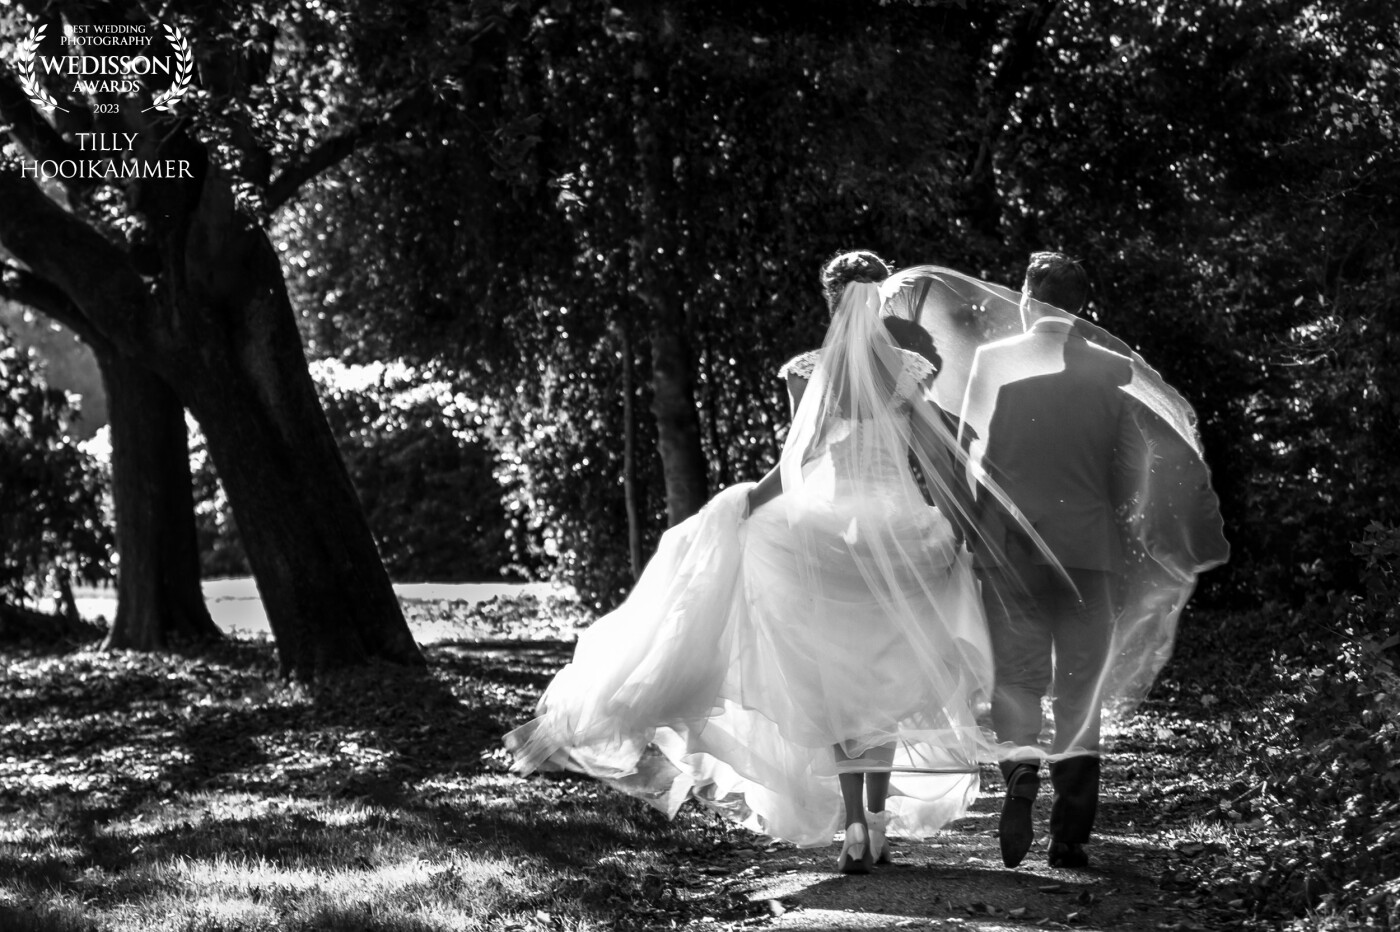 The bridal couple was unaware of the magical play of the sun and wind with the veil.